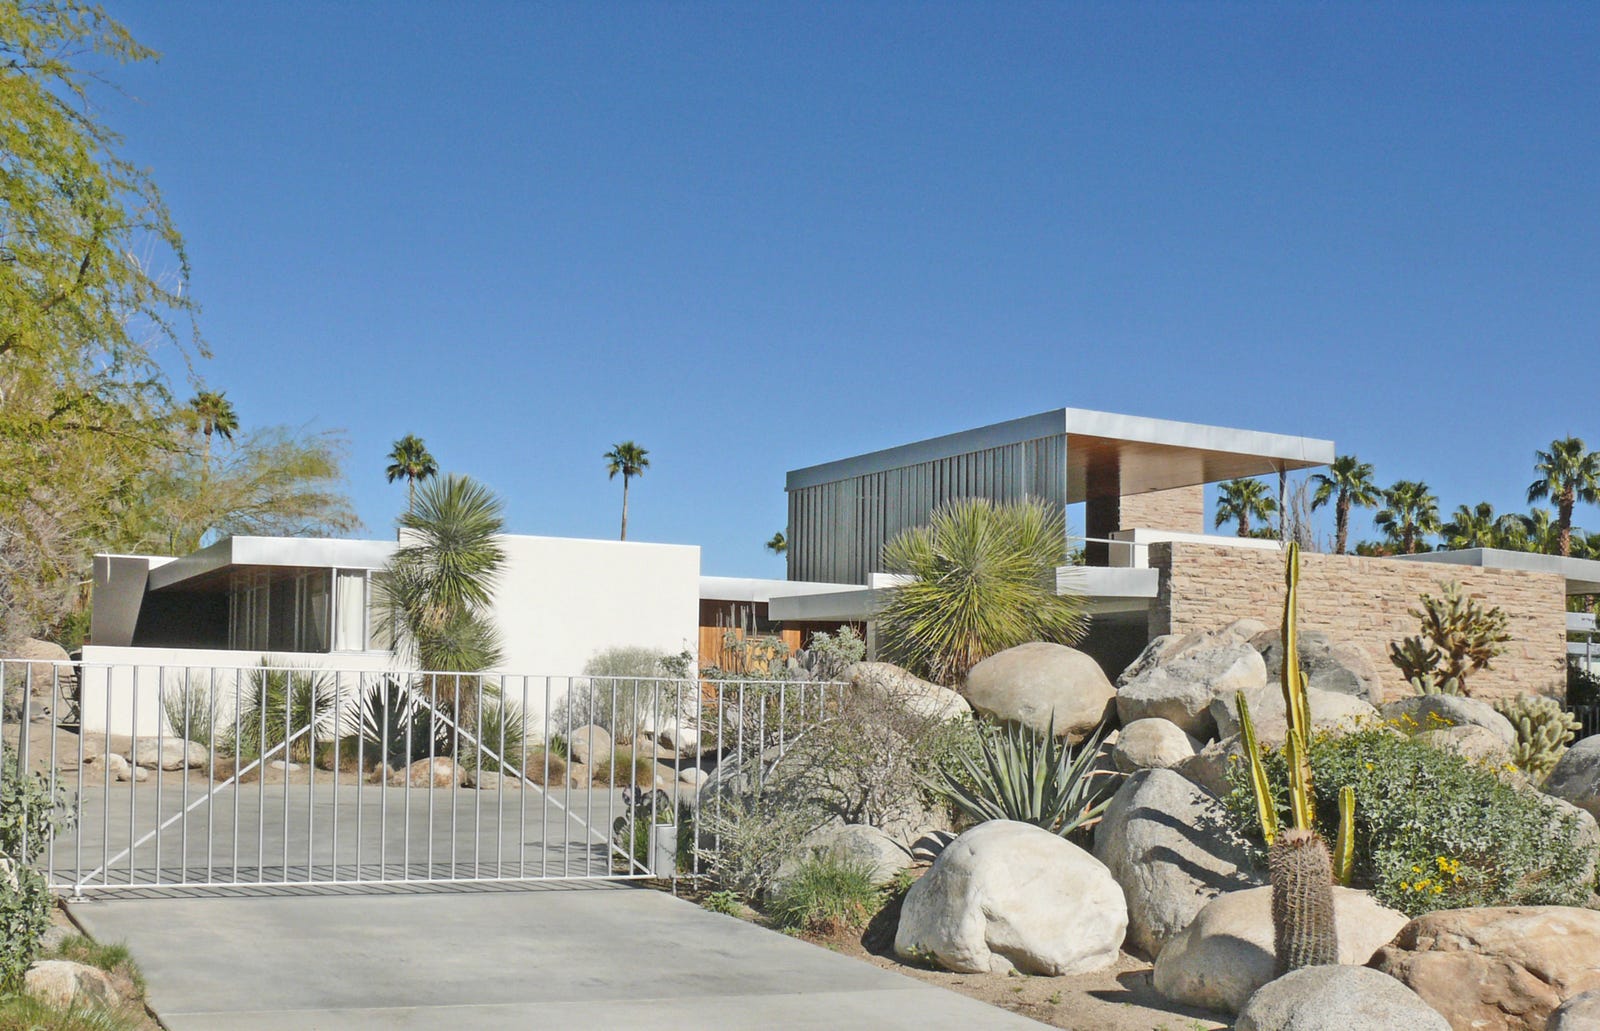 These Are the Must-Attend Events of Modernism Week in Palm Springs